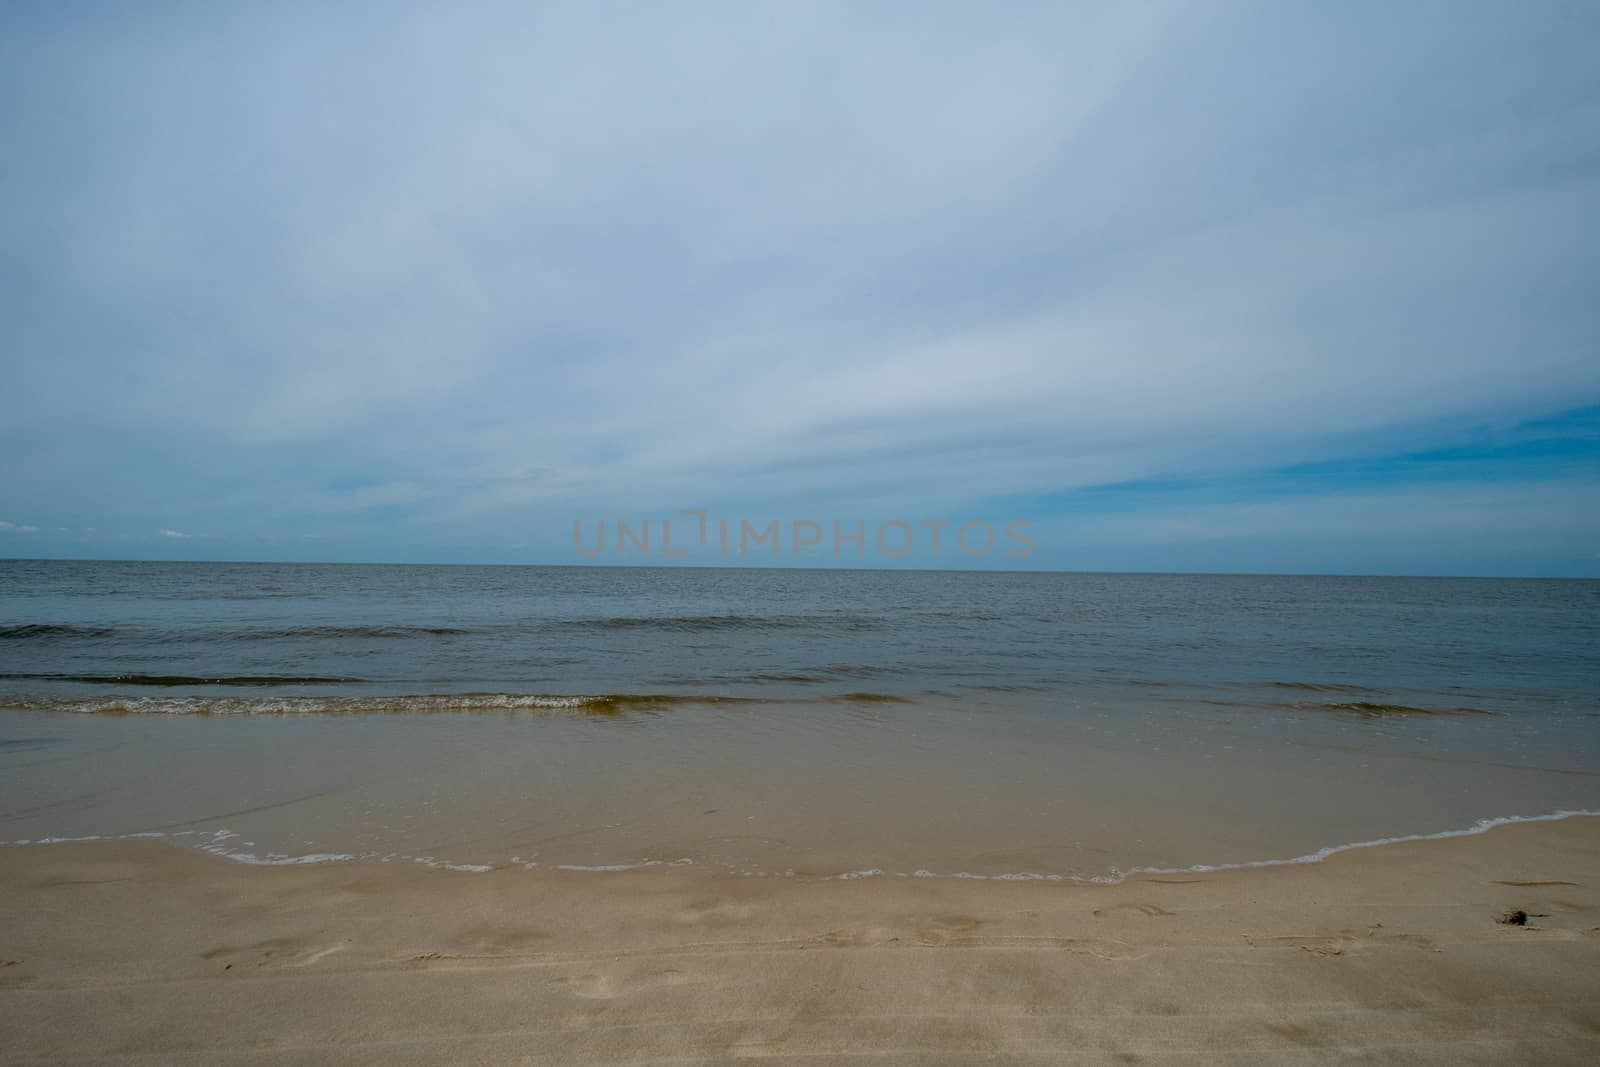 A Beach View on an Overcast Day at the Bay in the Villas, New Jersey